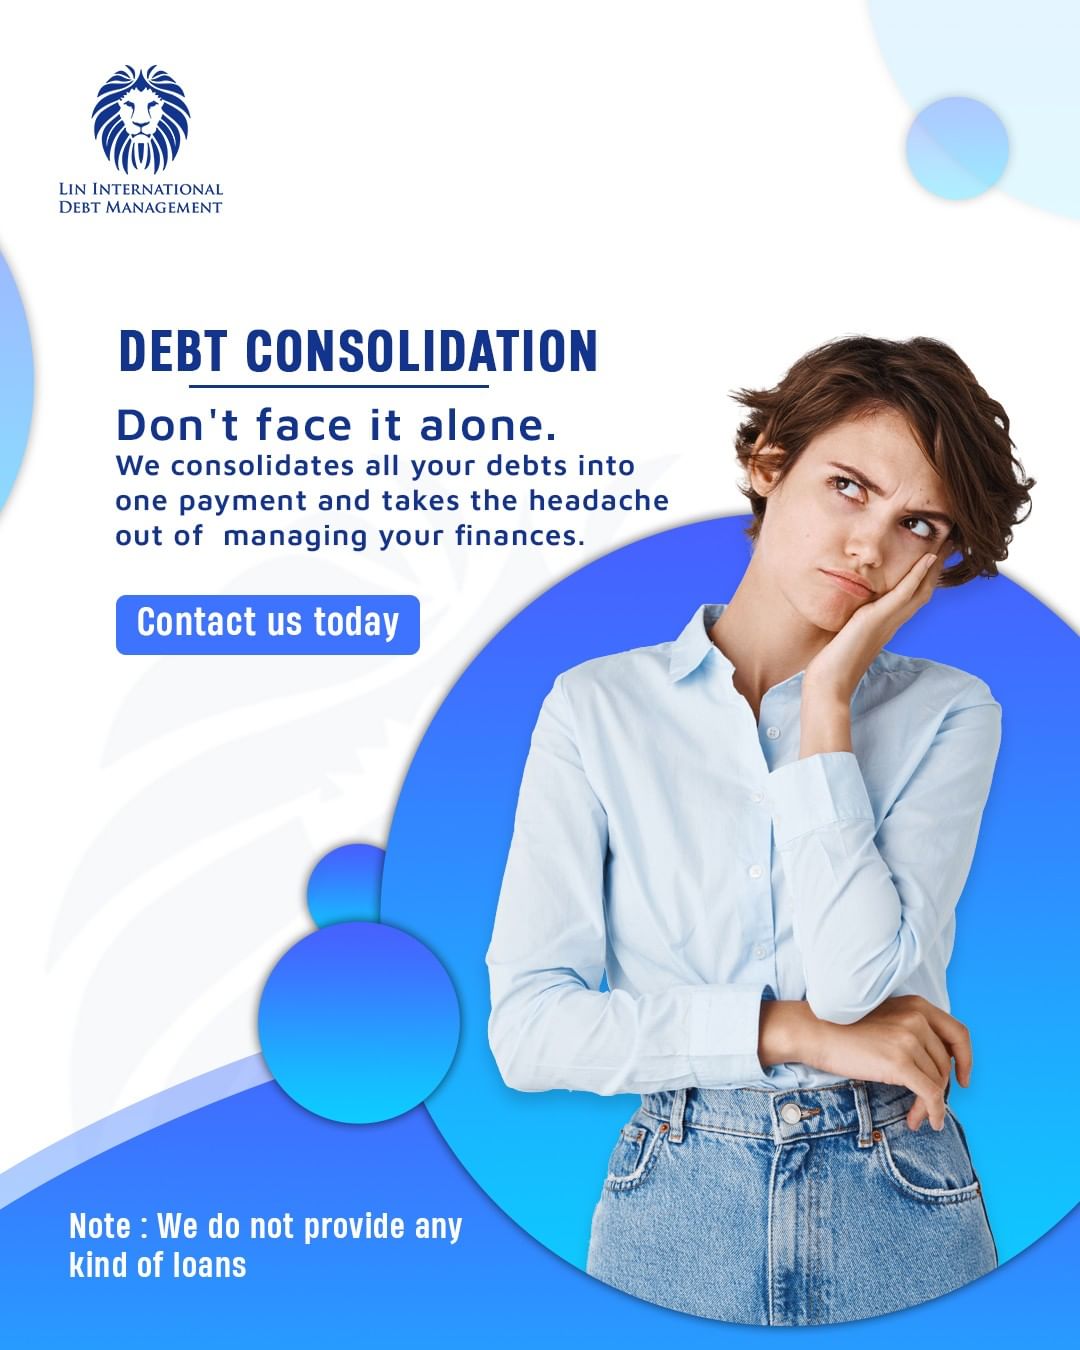 Debt Consolidation: Is This the Right Thing to Do?